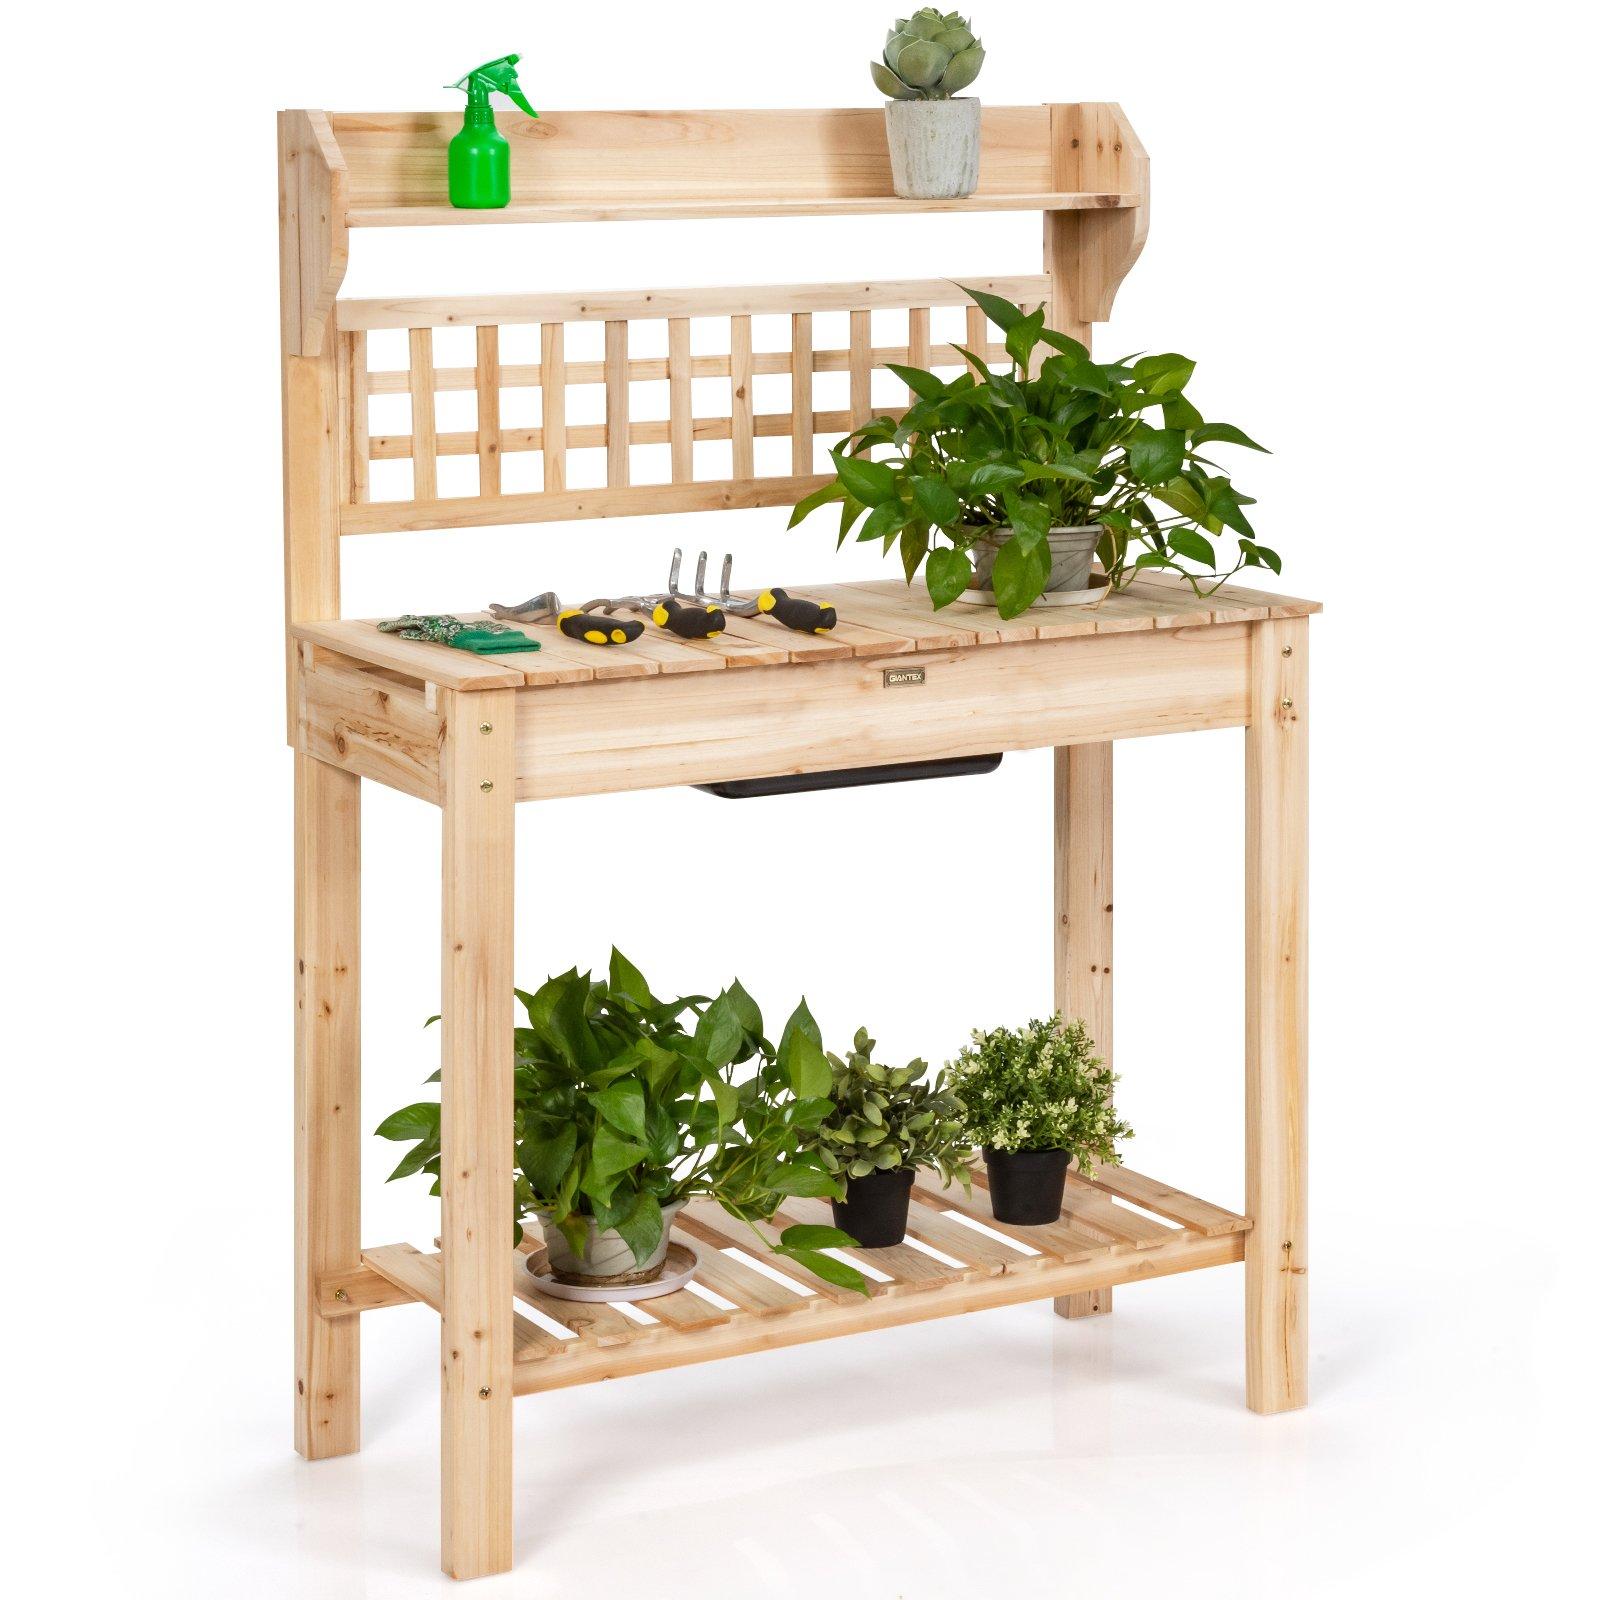 Garden Potting Bench Outdoor Wood Work Table Planter Bench Work Station